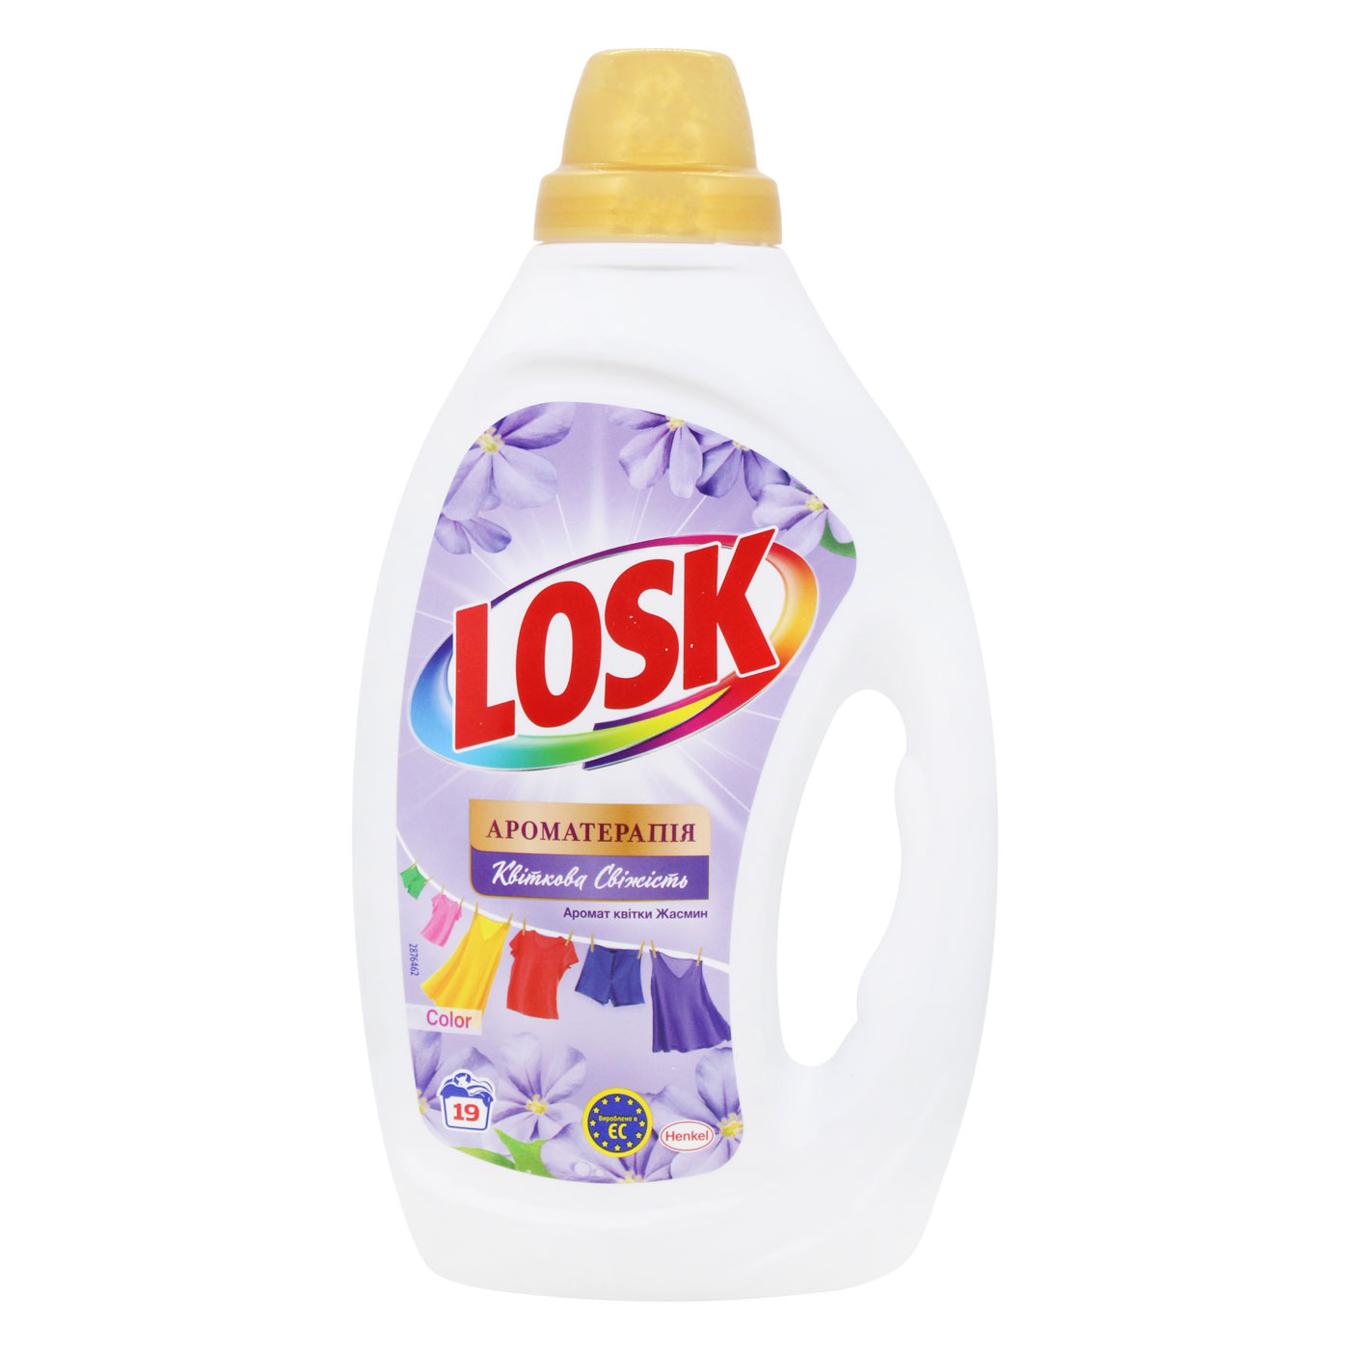 Washing gel Losk Color Essential oils and aroma of Jasmine flower 855 ml